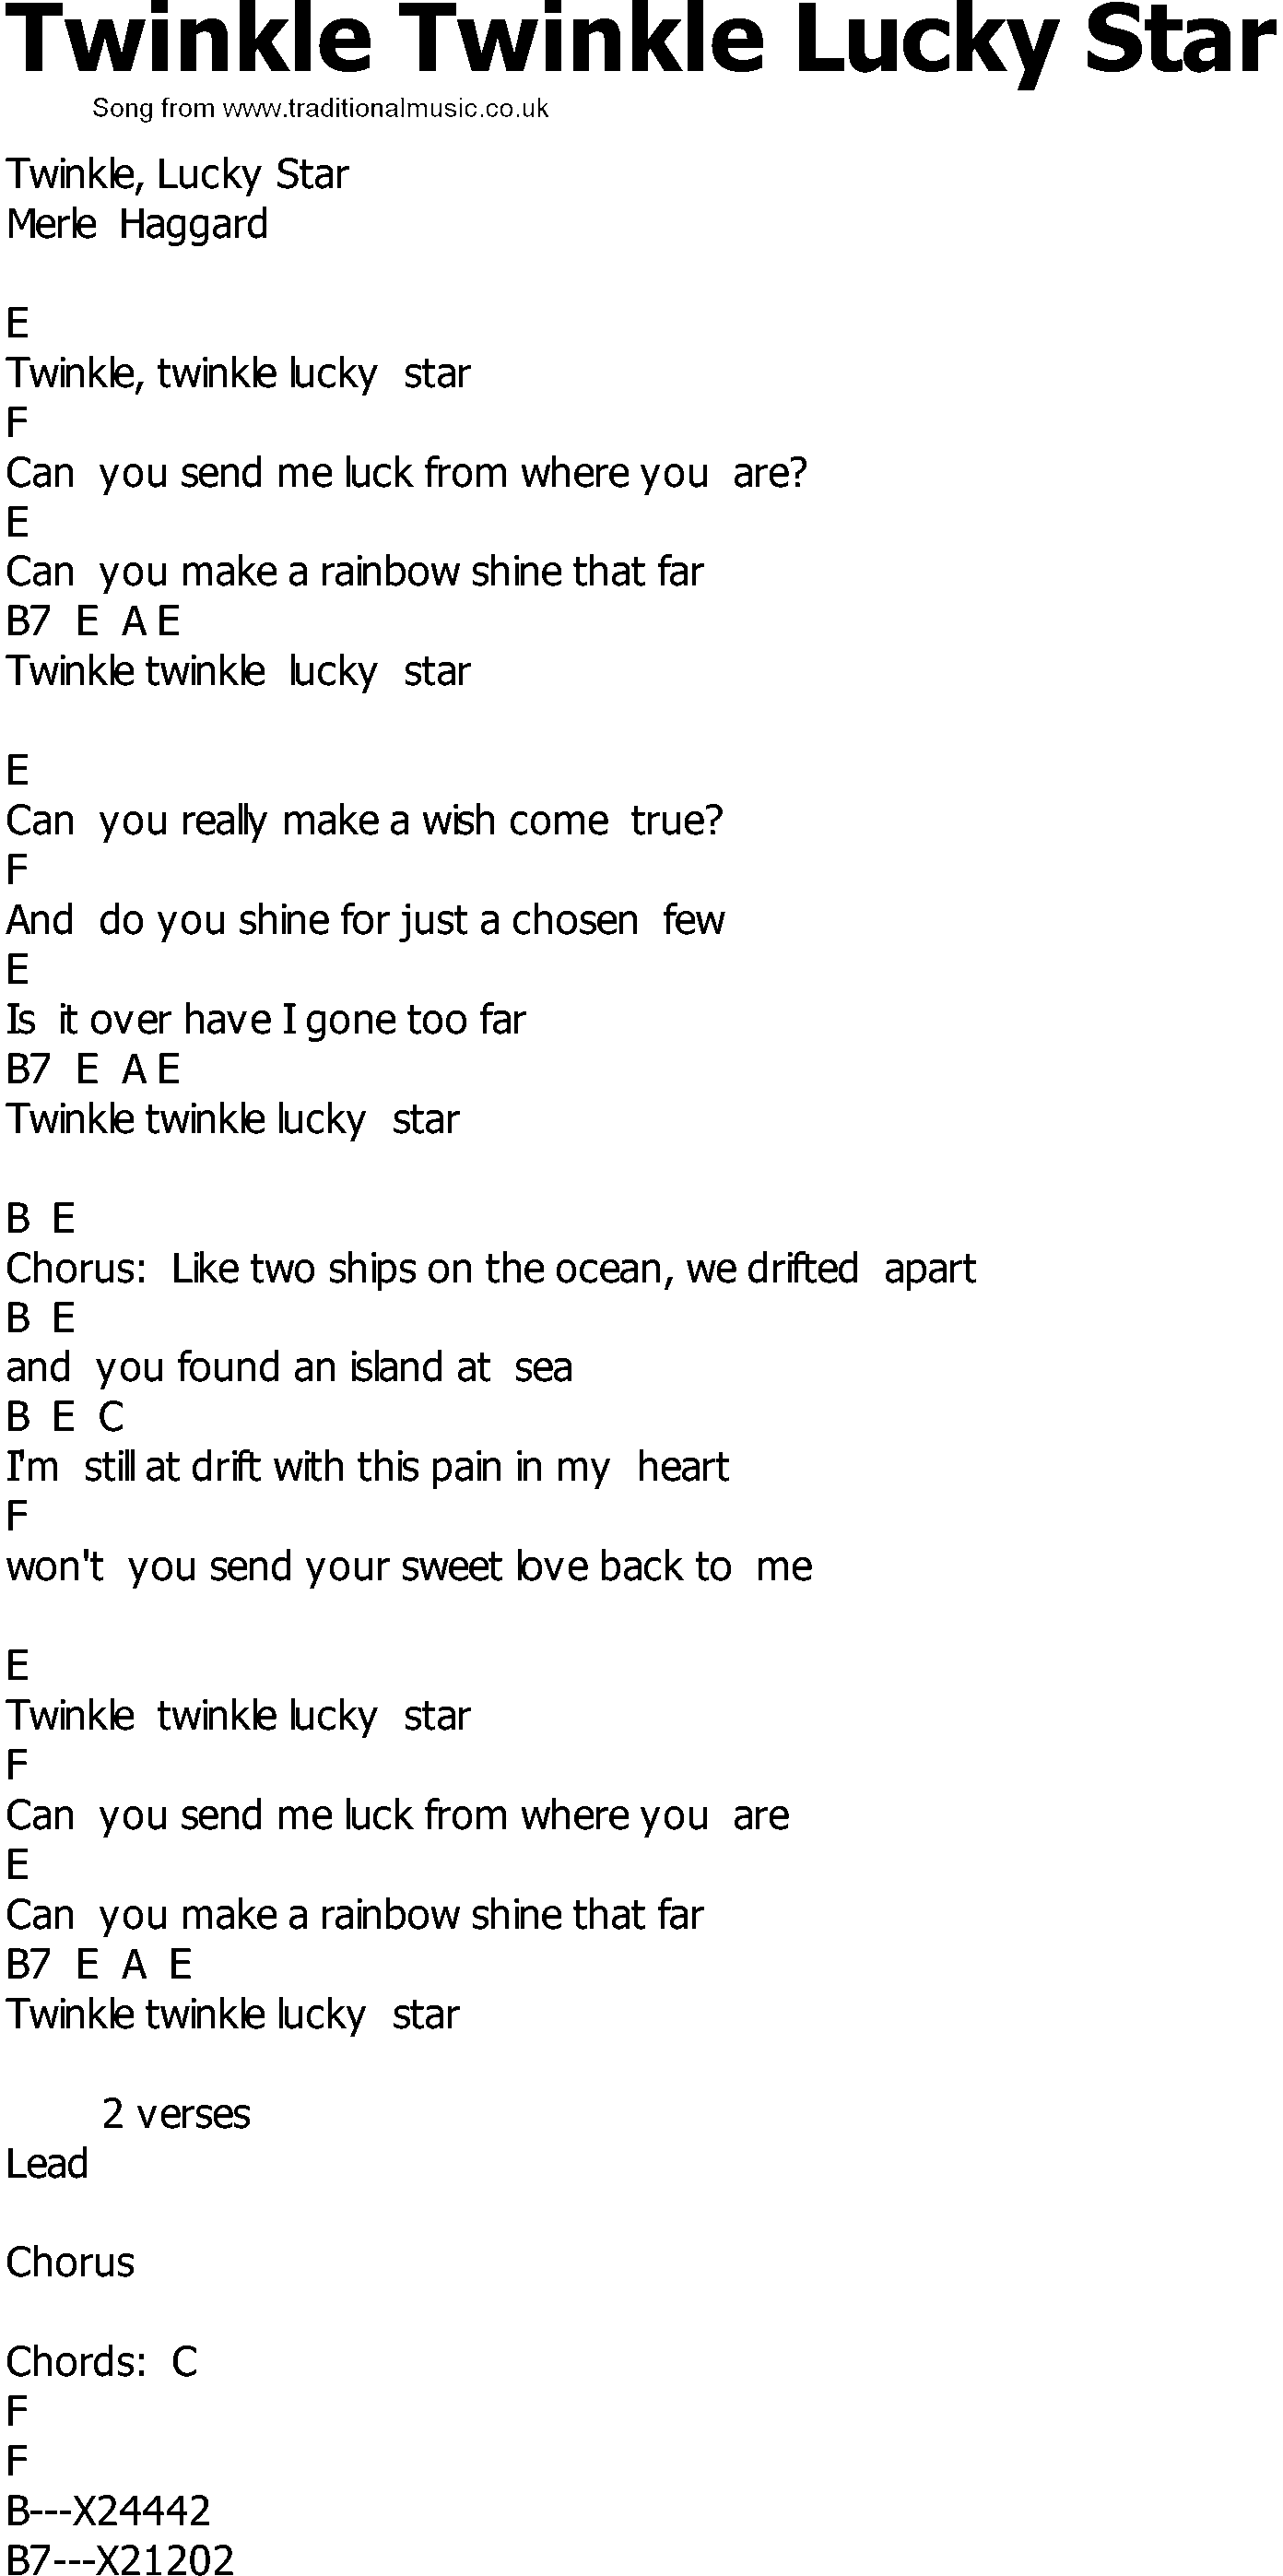 Old Country song lyrics with chords - Twinkle Twinkle Lucky Star